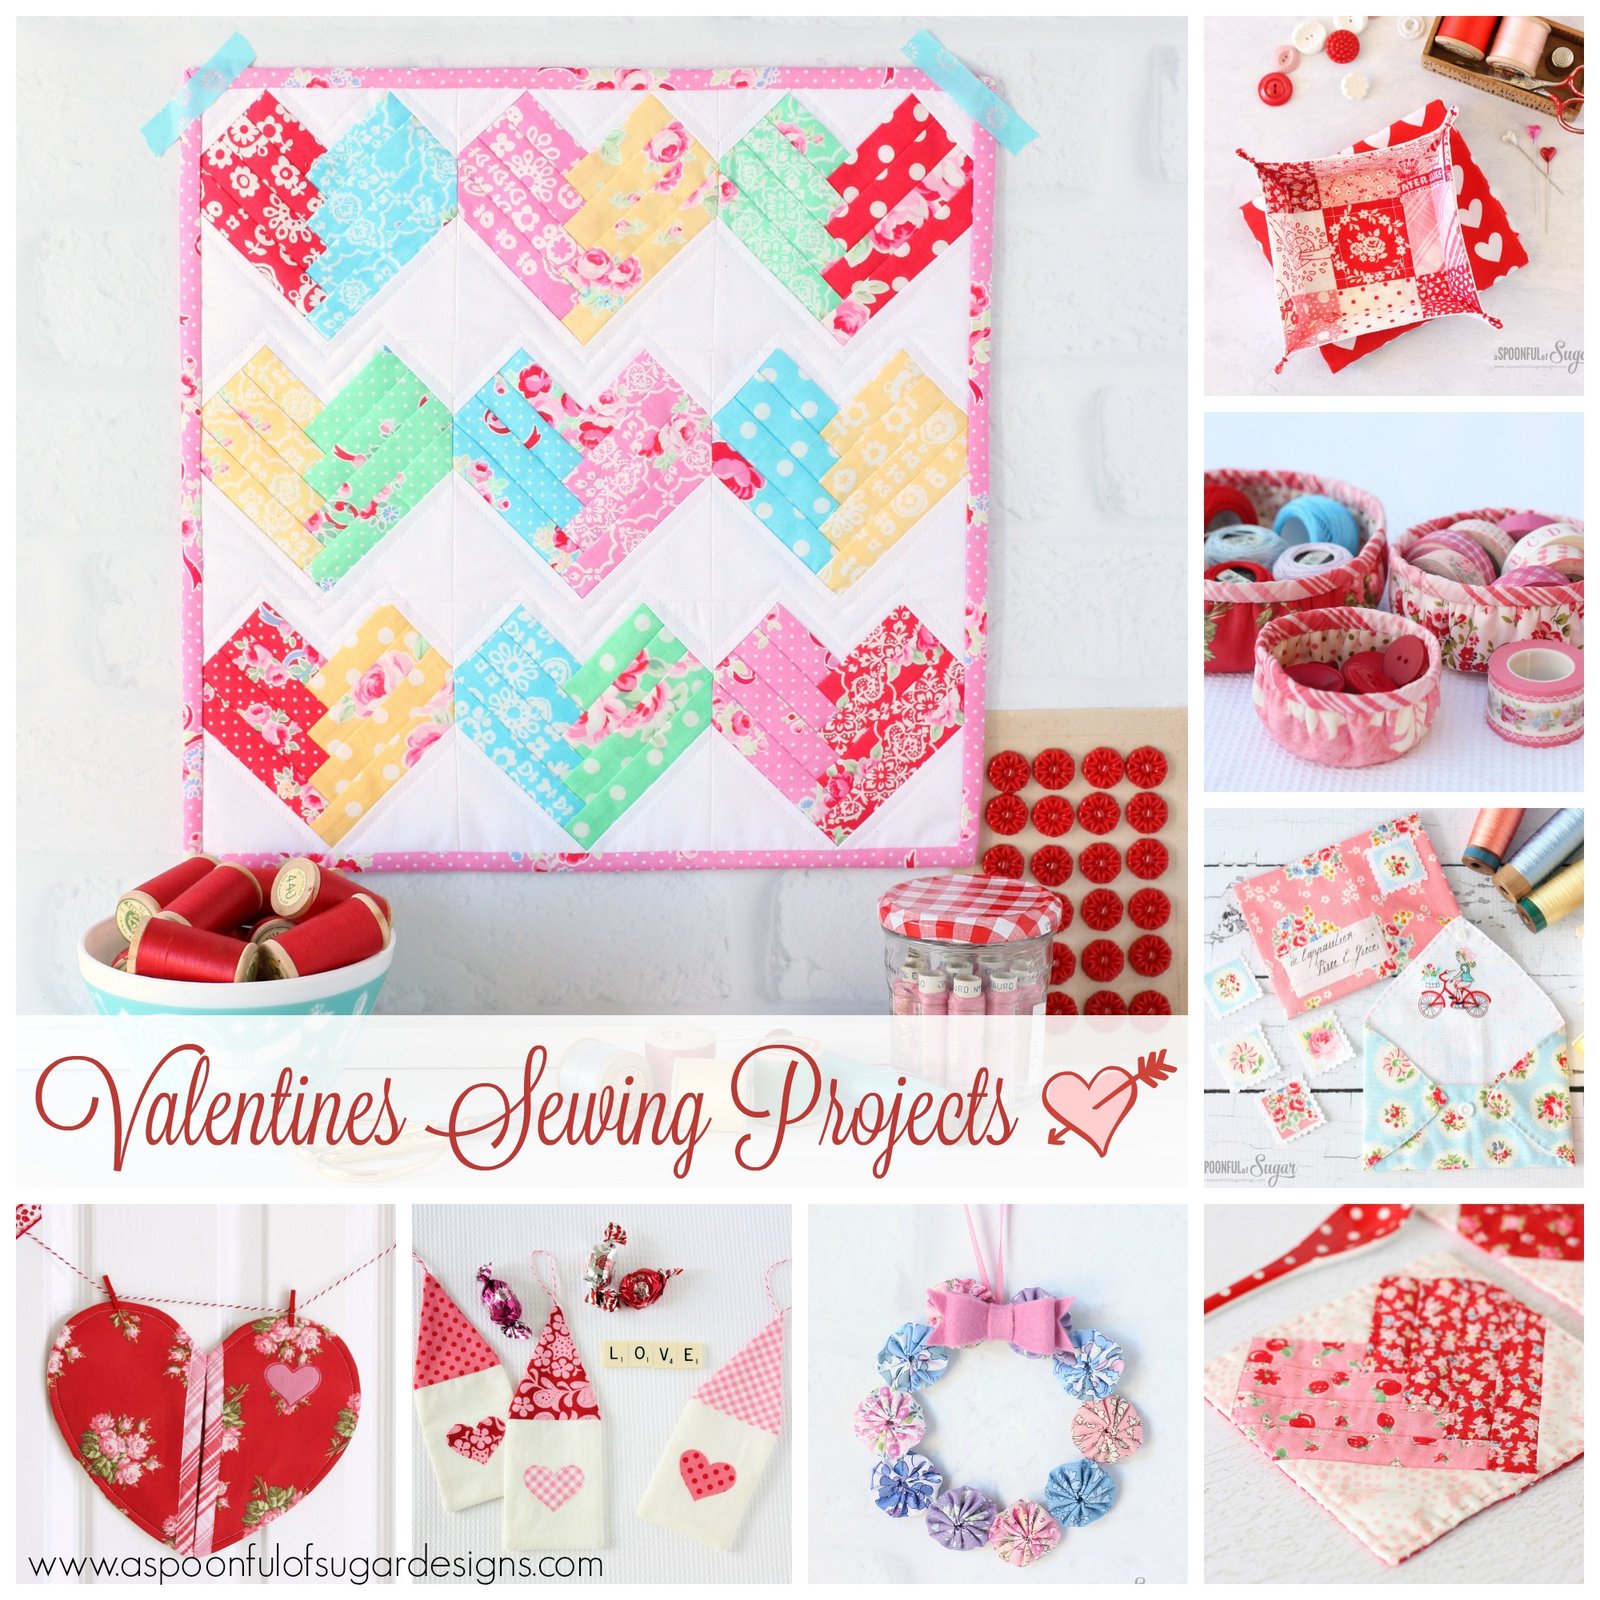 Valentines Sewing Projects from A Spoonful of Sugar   www.aspoonfulofsugardesigns.com